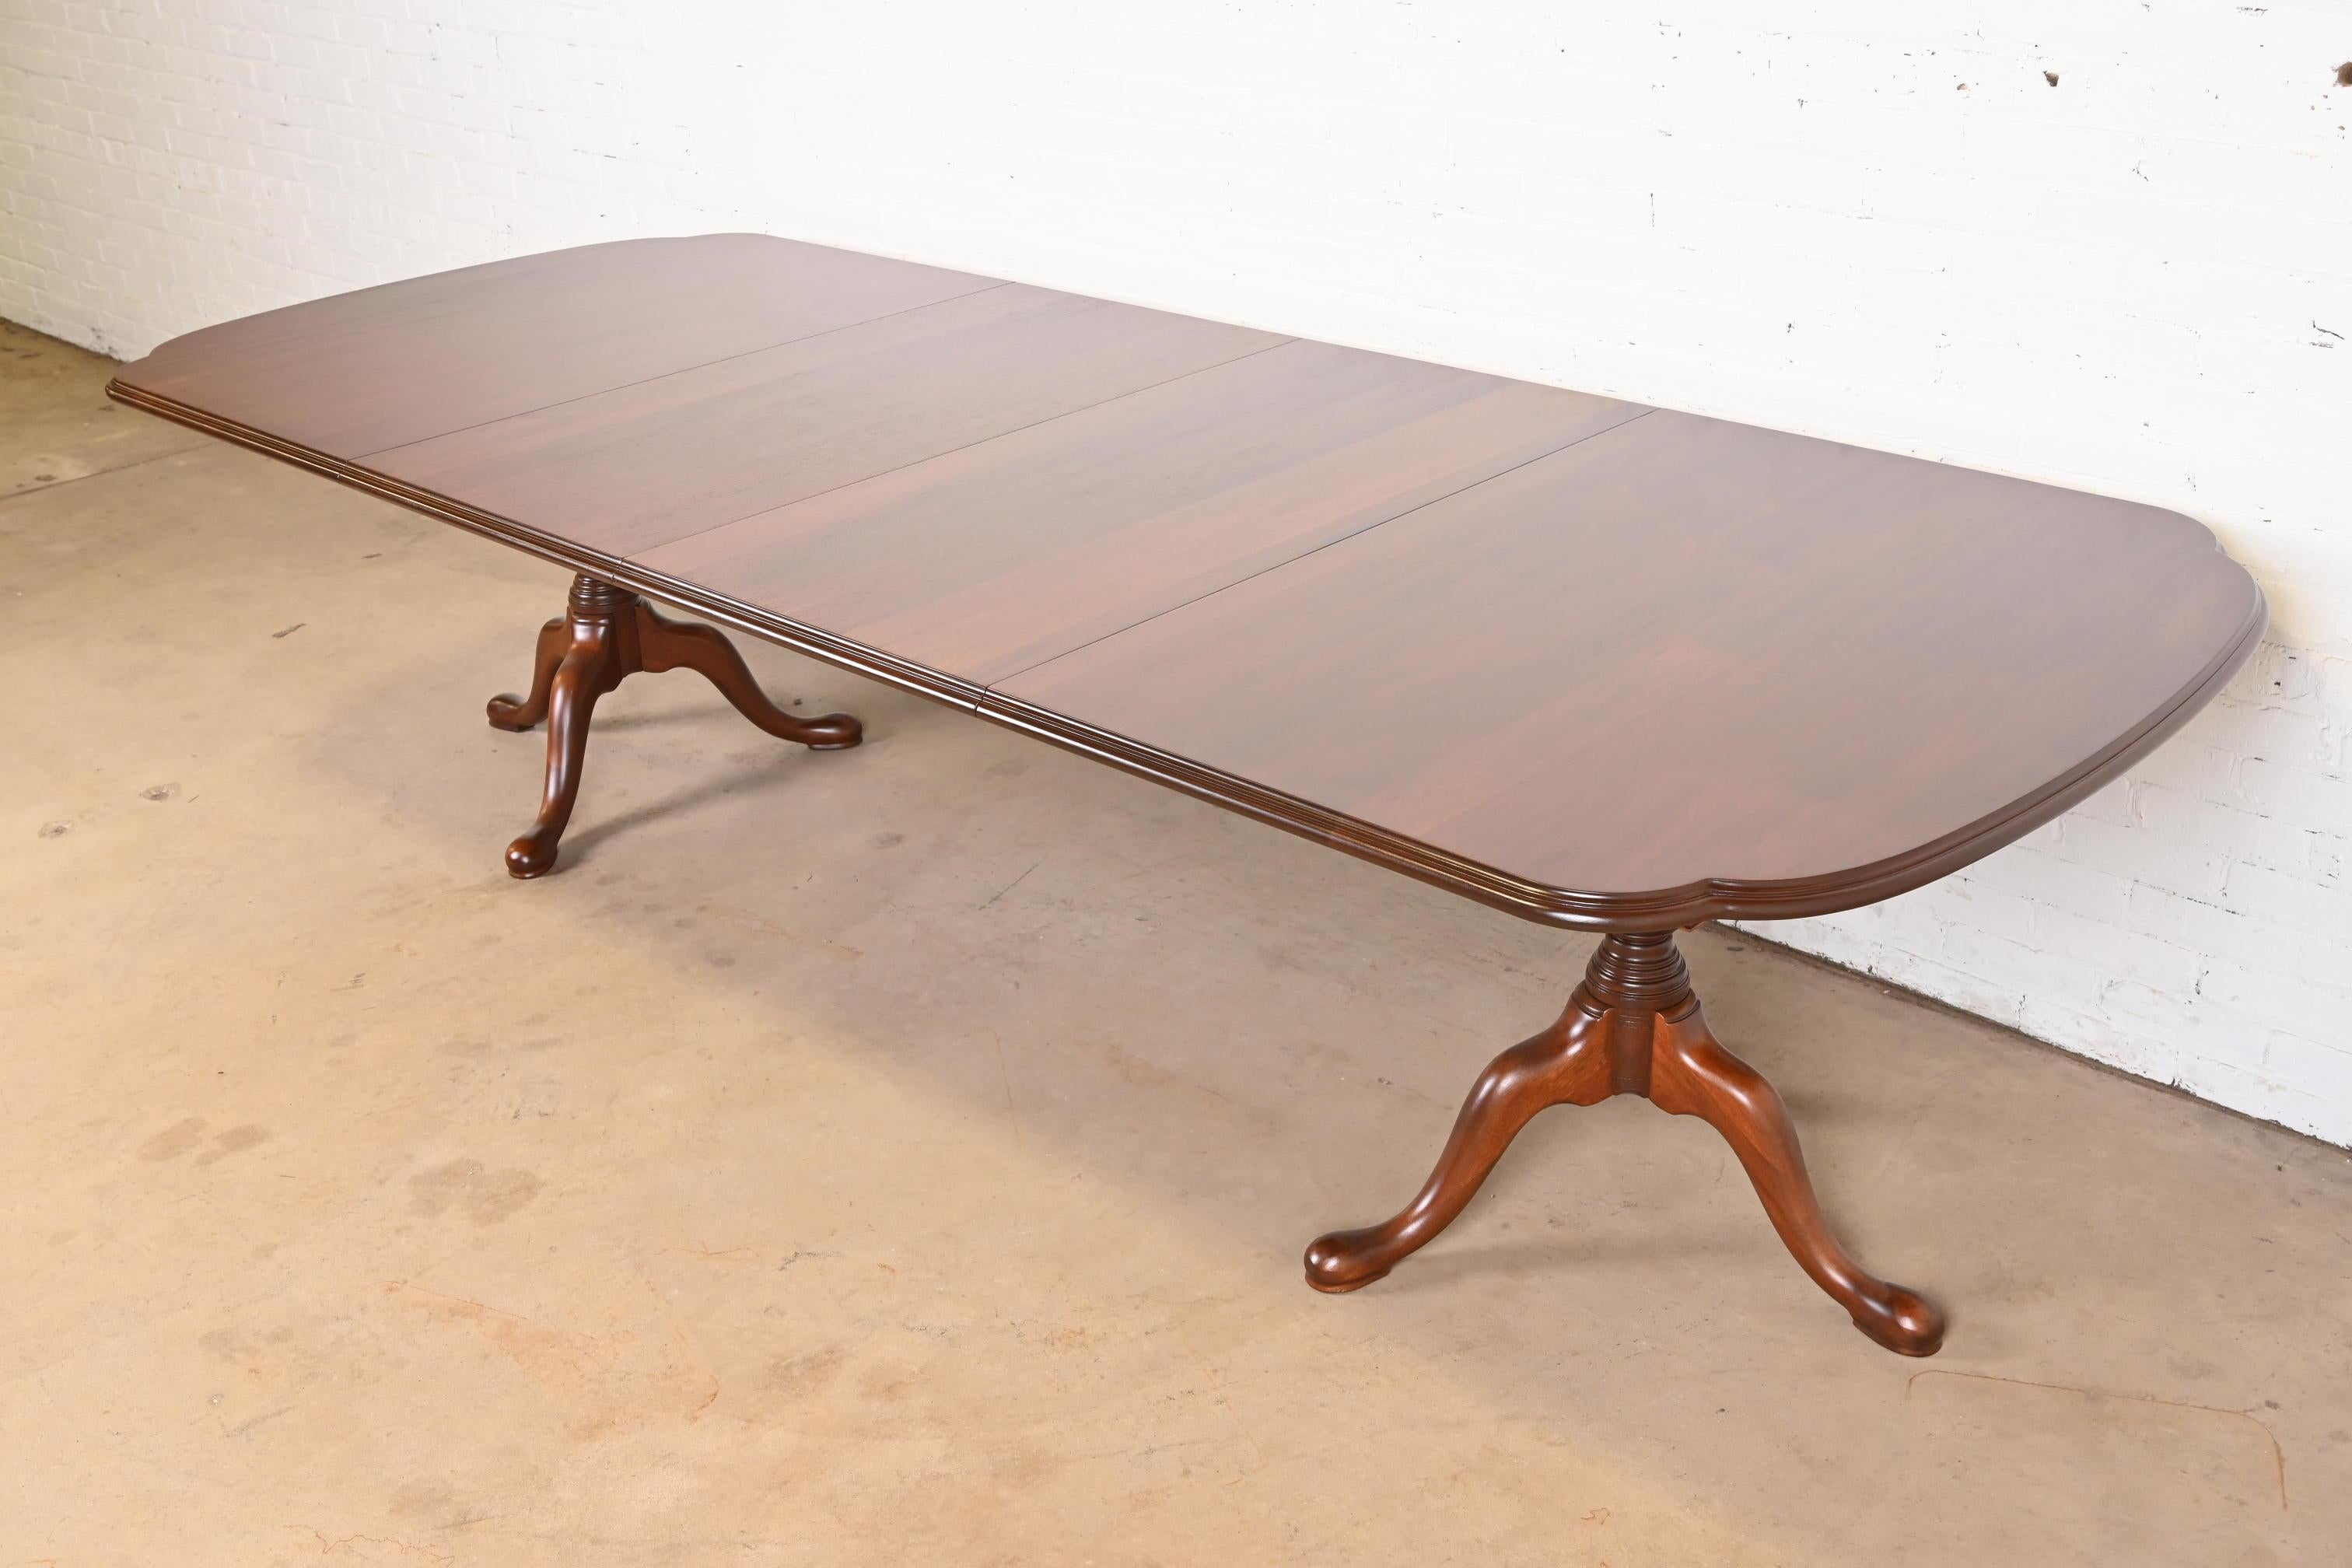 An exceptional Georgian, Chippendale, or Queen Anne style solid mahogany double pedestal extension dining table

By Henkel Harris

USA, 2000

Measures: 71.5